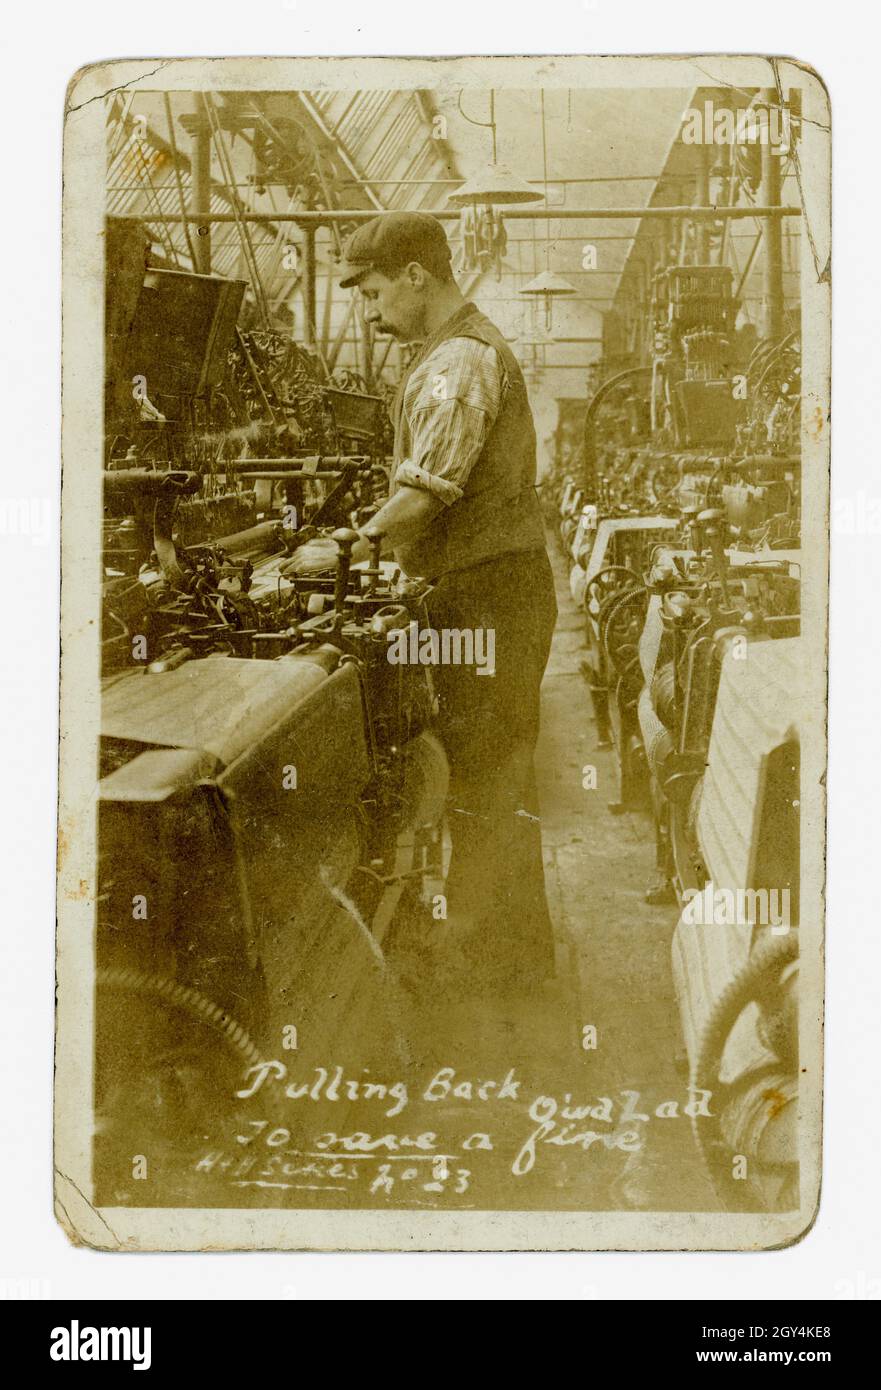 Original Edwardian era postcard entitled 'Pulling Back Quick Lad to Save a Fine' indicative of the poor working conditions of this time  - low wages, unhealthy damp and dusty workplaces, punishments and fines - . Photograph of a young man operating a weaving machine at a cotton mill, Nelson, Pendle, Lancashire, U.K. circa 1905. Stock Photo